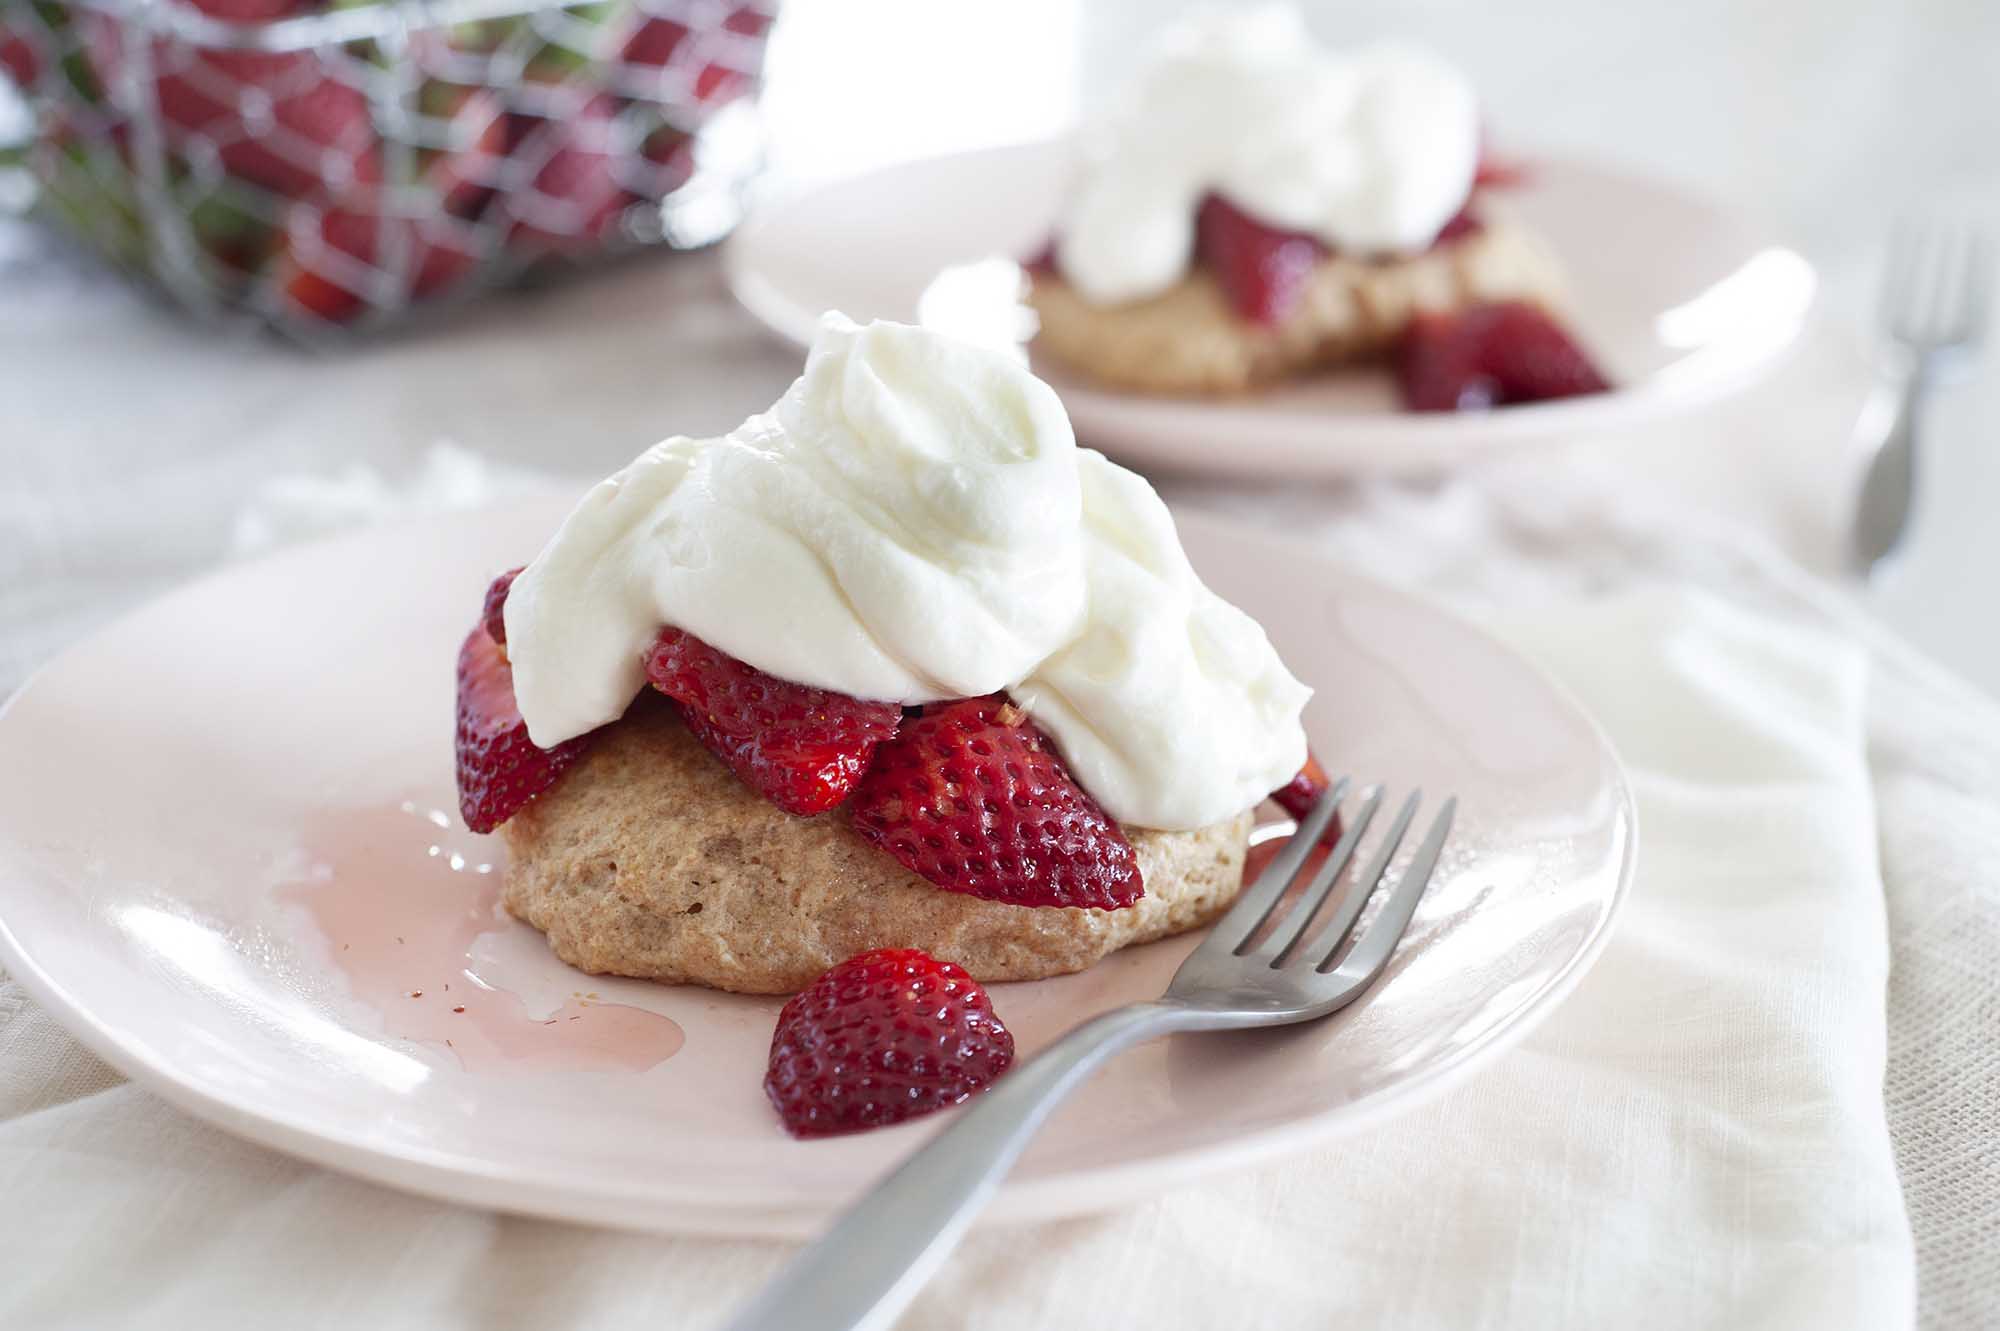 Two plates with healthier strawberry shortcake set on a table with white linens. Shortcake is piled with sliced strawberries and whipped yogurt topping. A wire basket of strawberries is to the left of the plates.